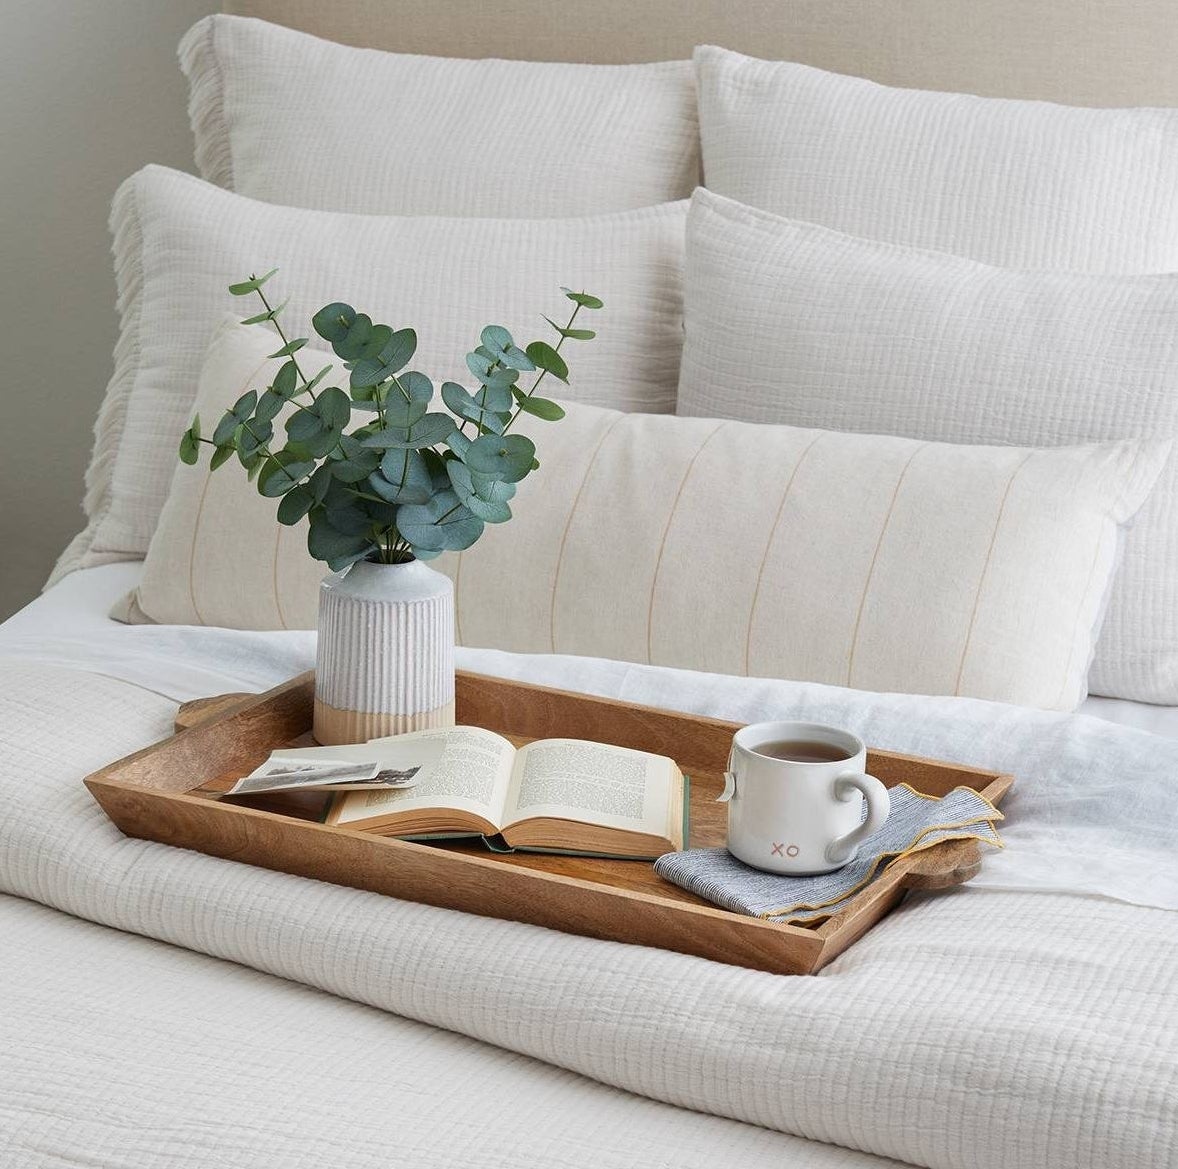 faux eucalyptus arrangement in a painted white pot sitting on a tray on a bed 